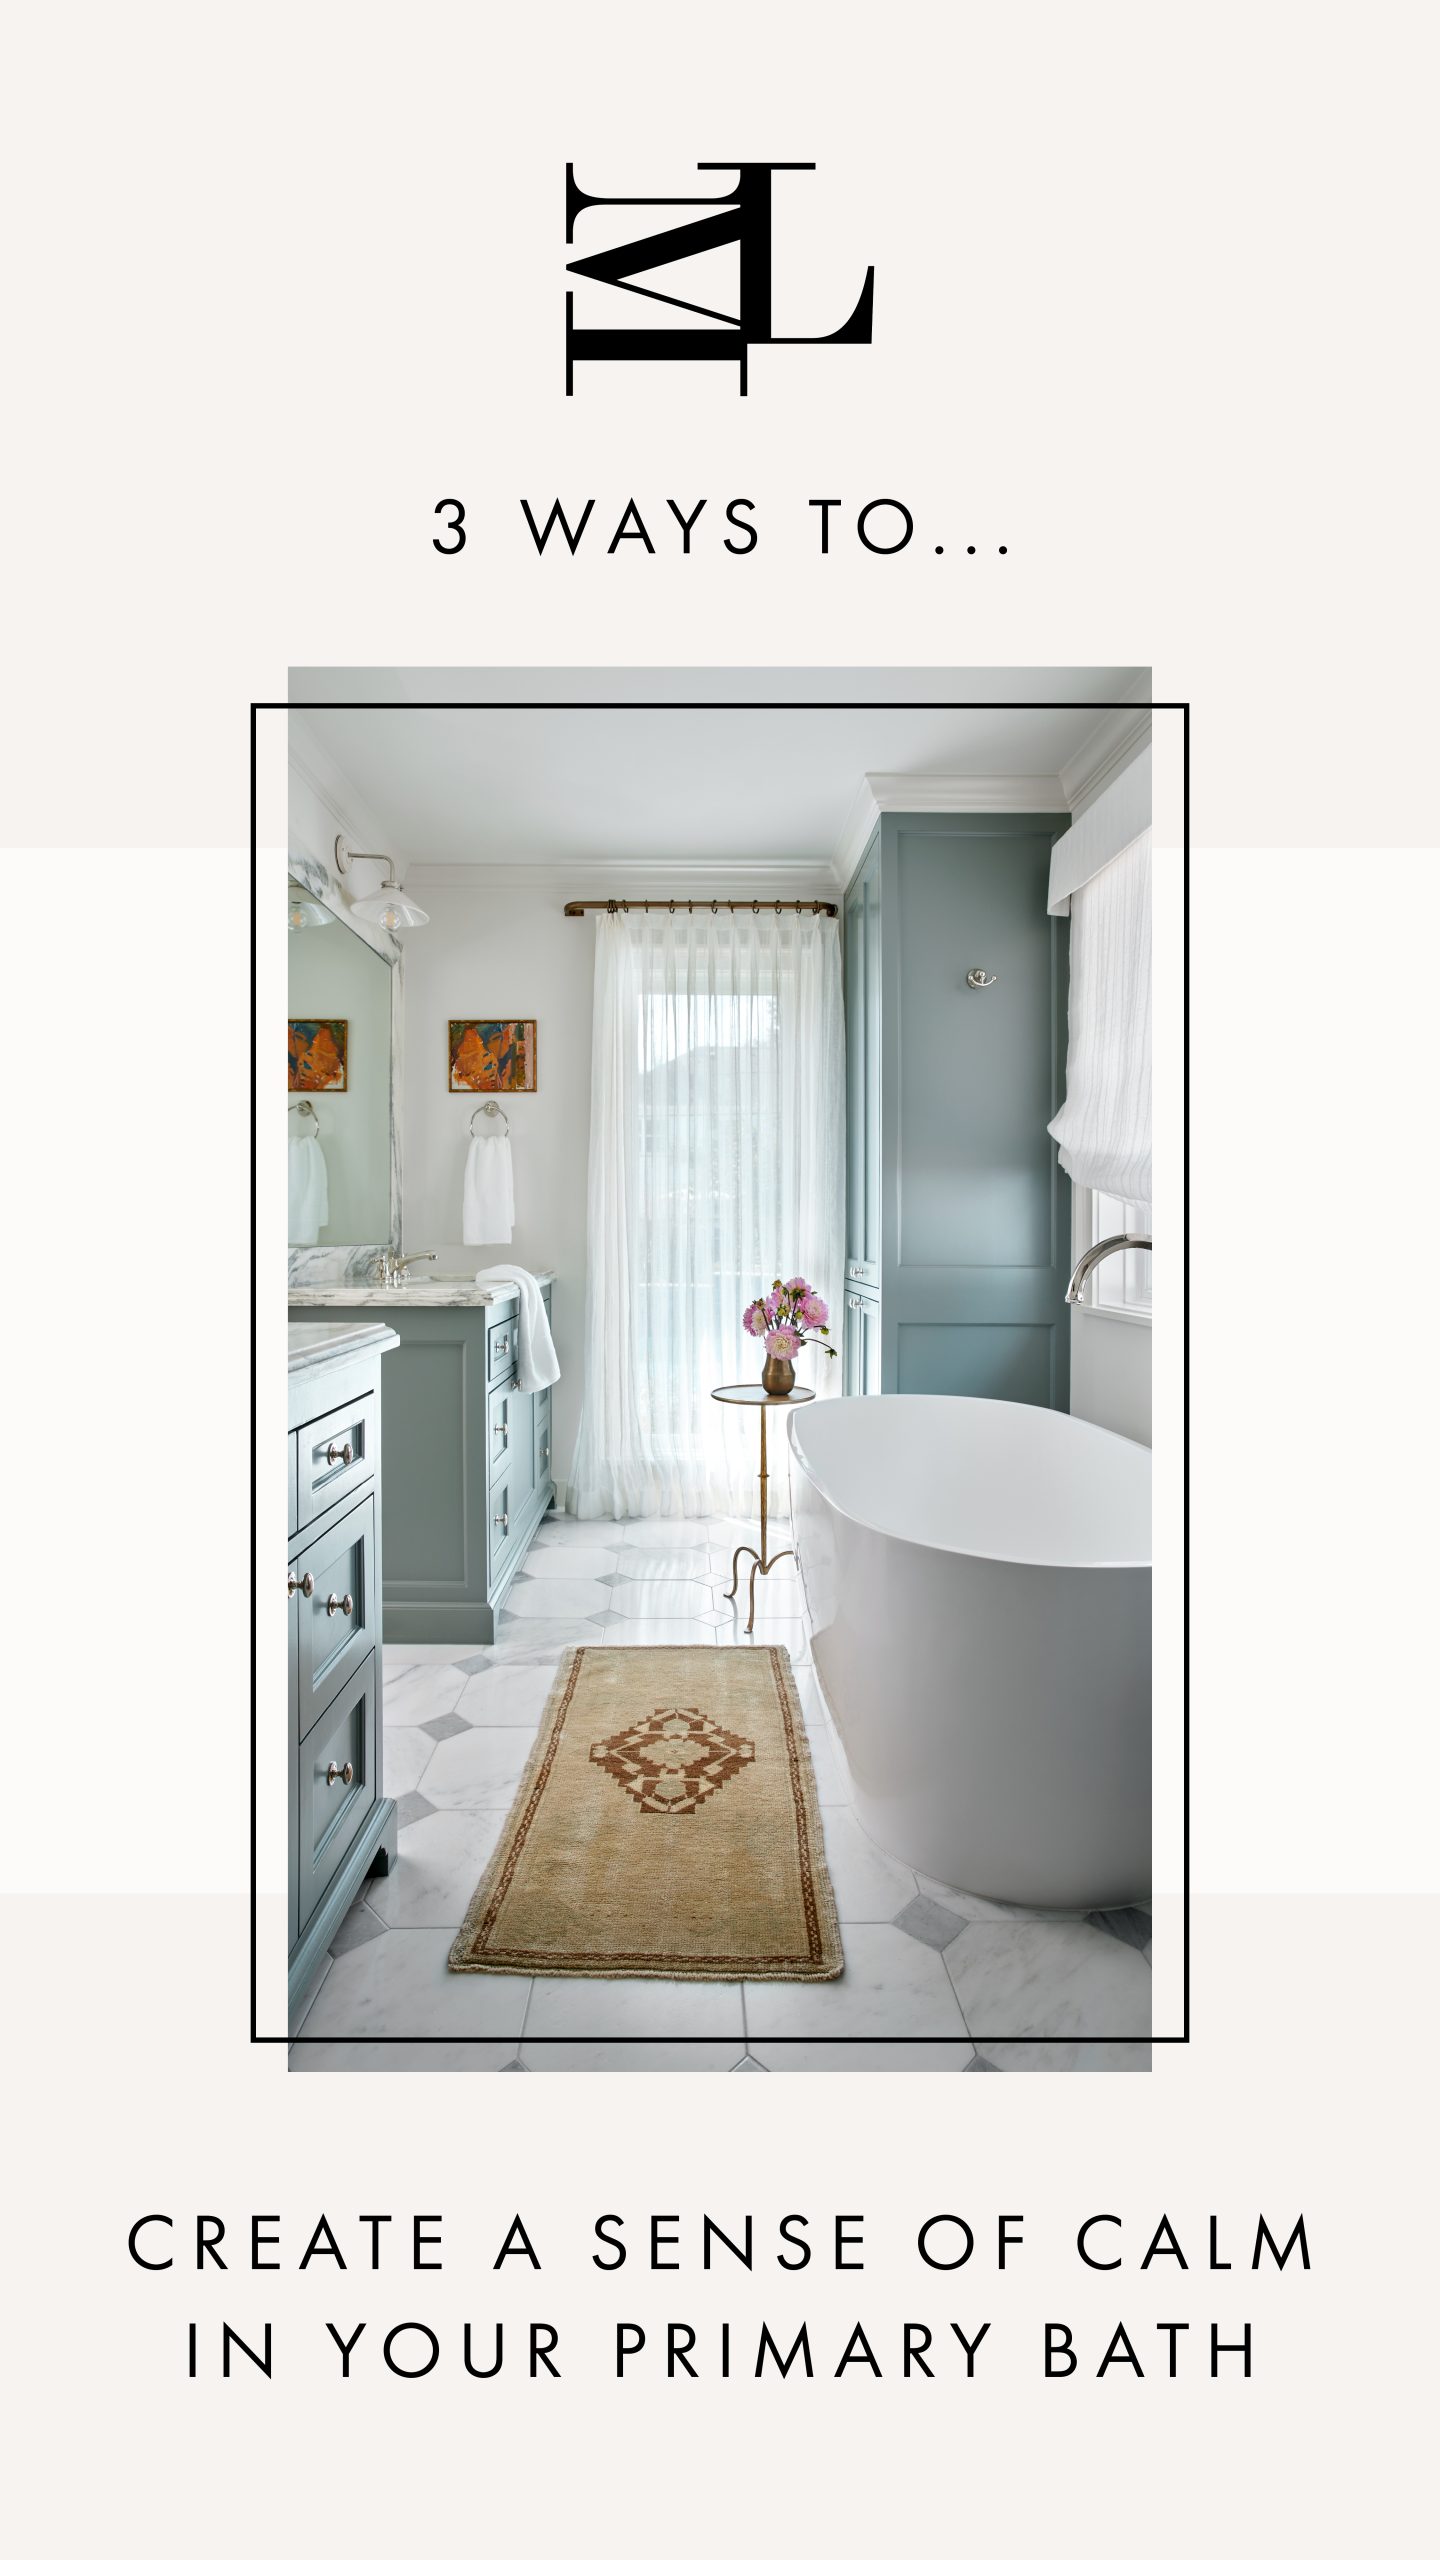 3 Ways To: Create a sense of calm in your primary bath